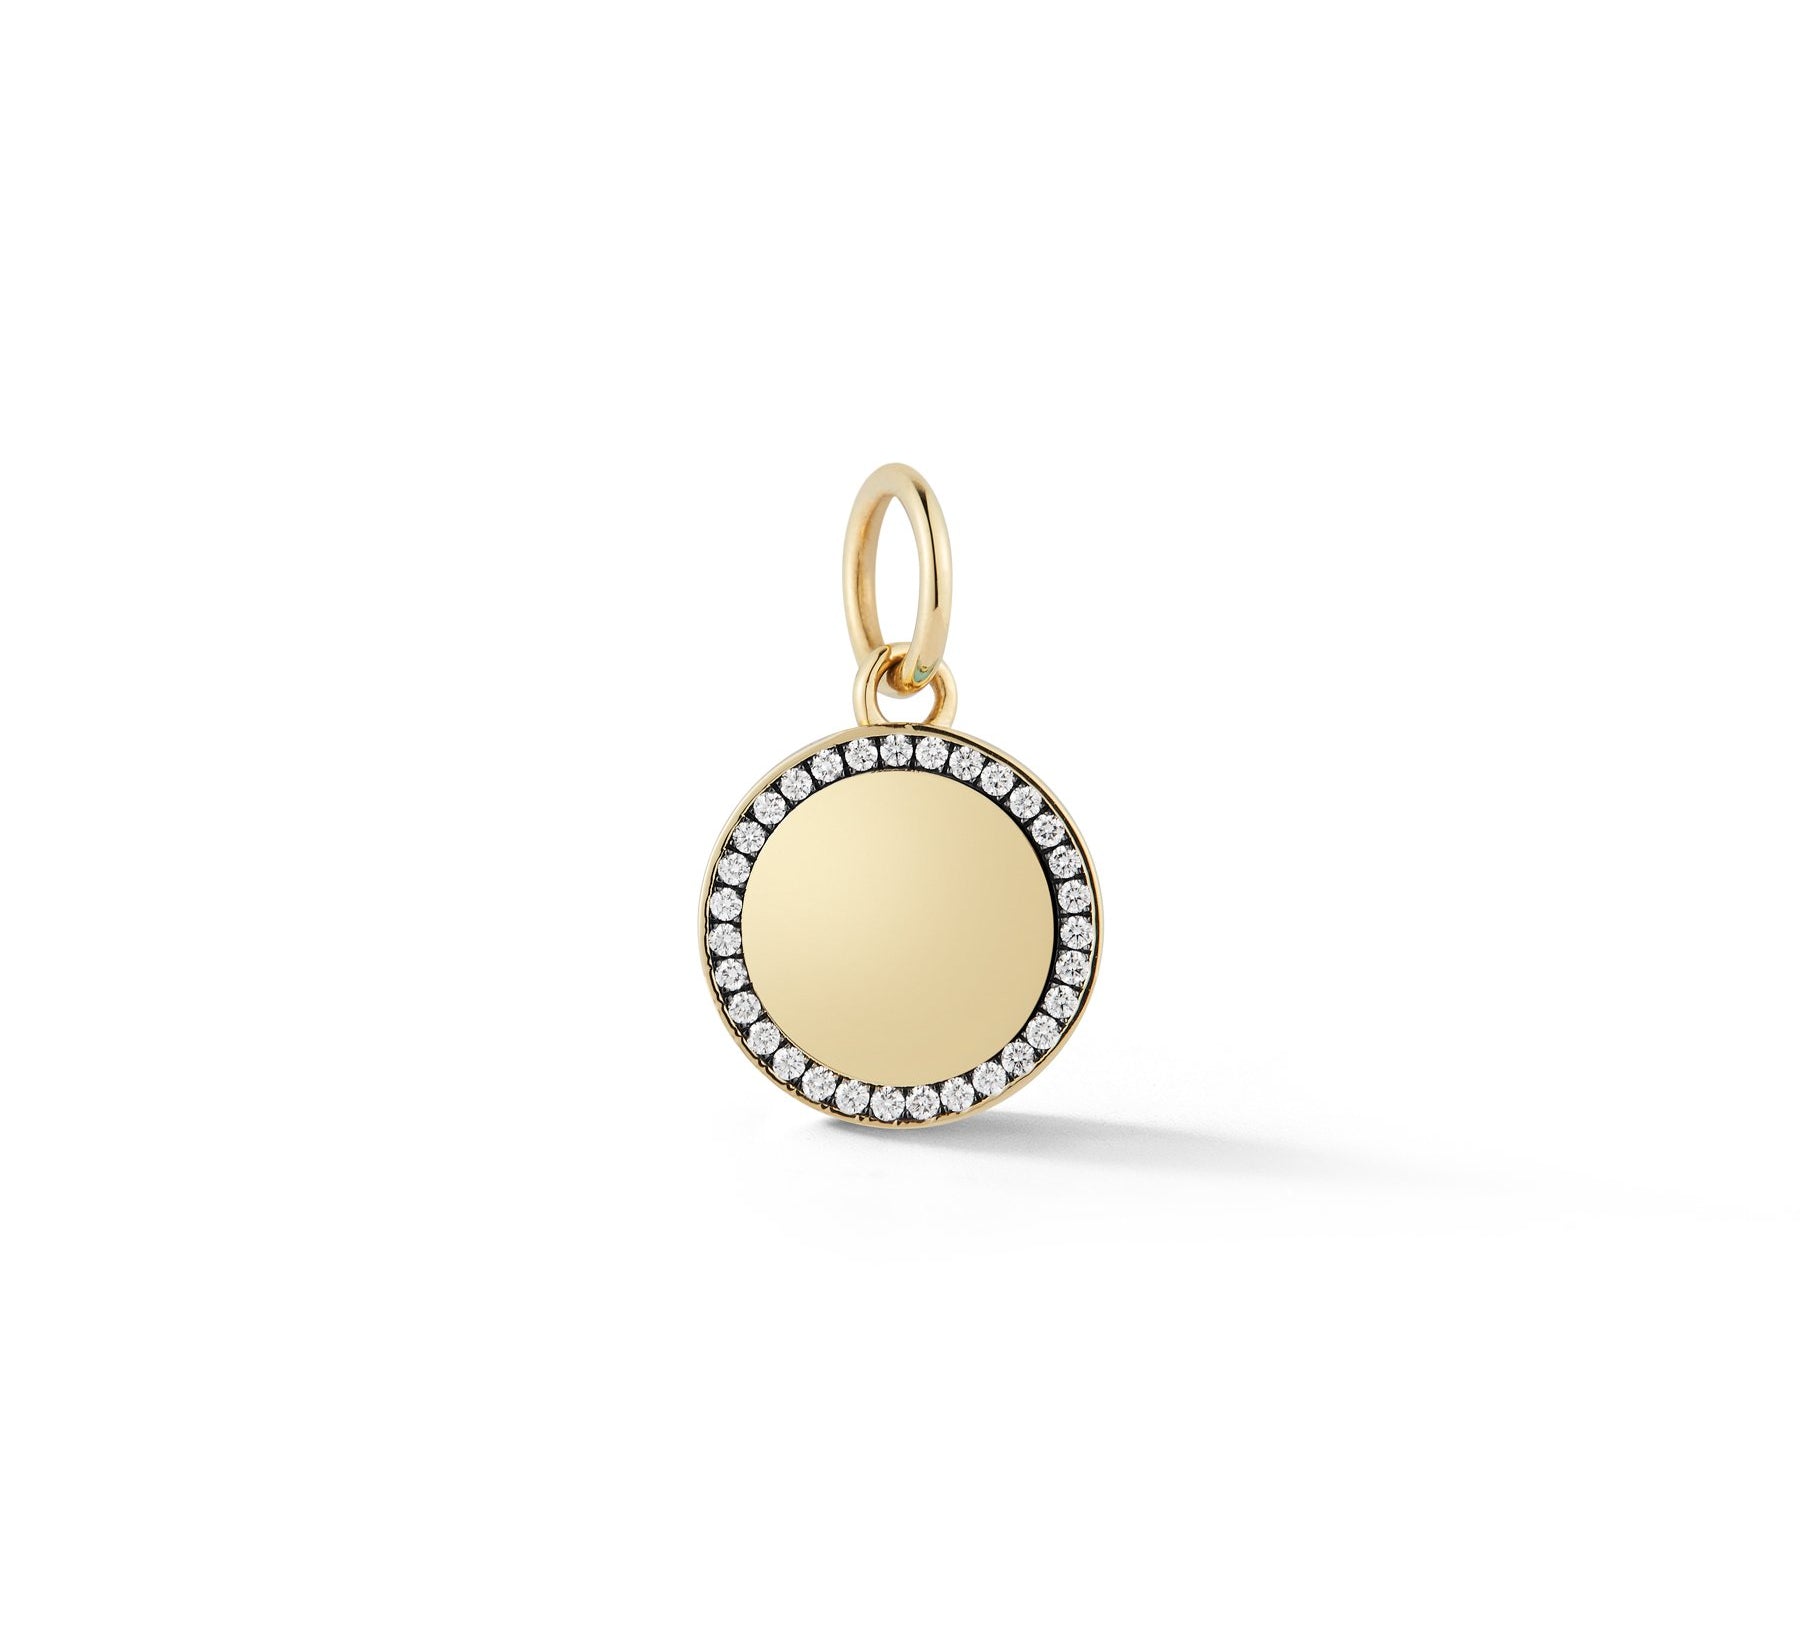 Personalized Gold and Pave Diamond Pendant